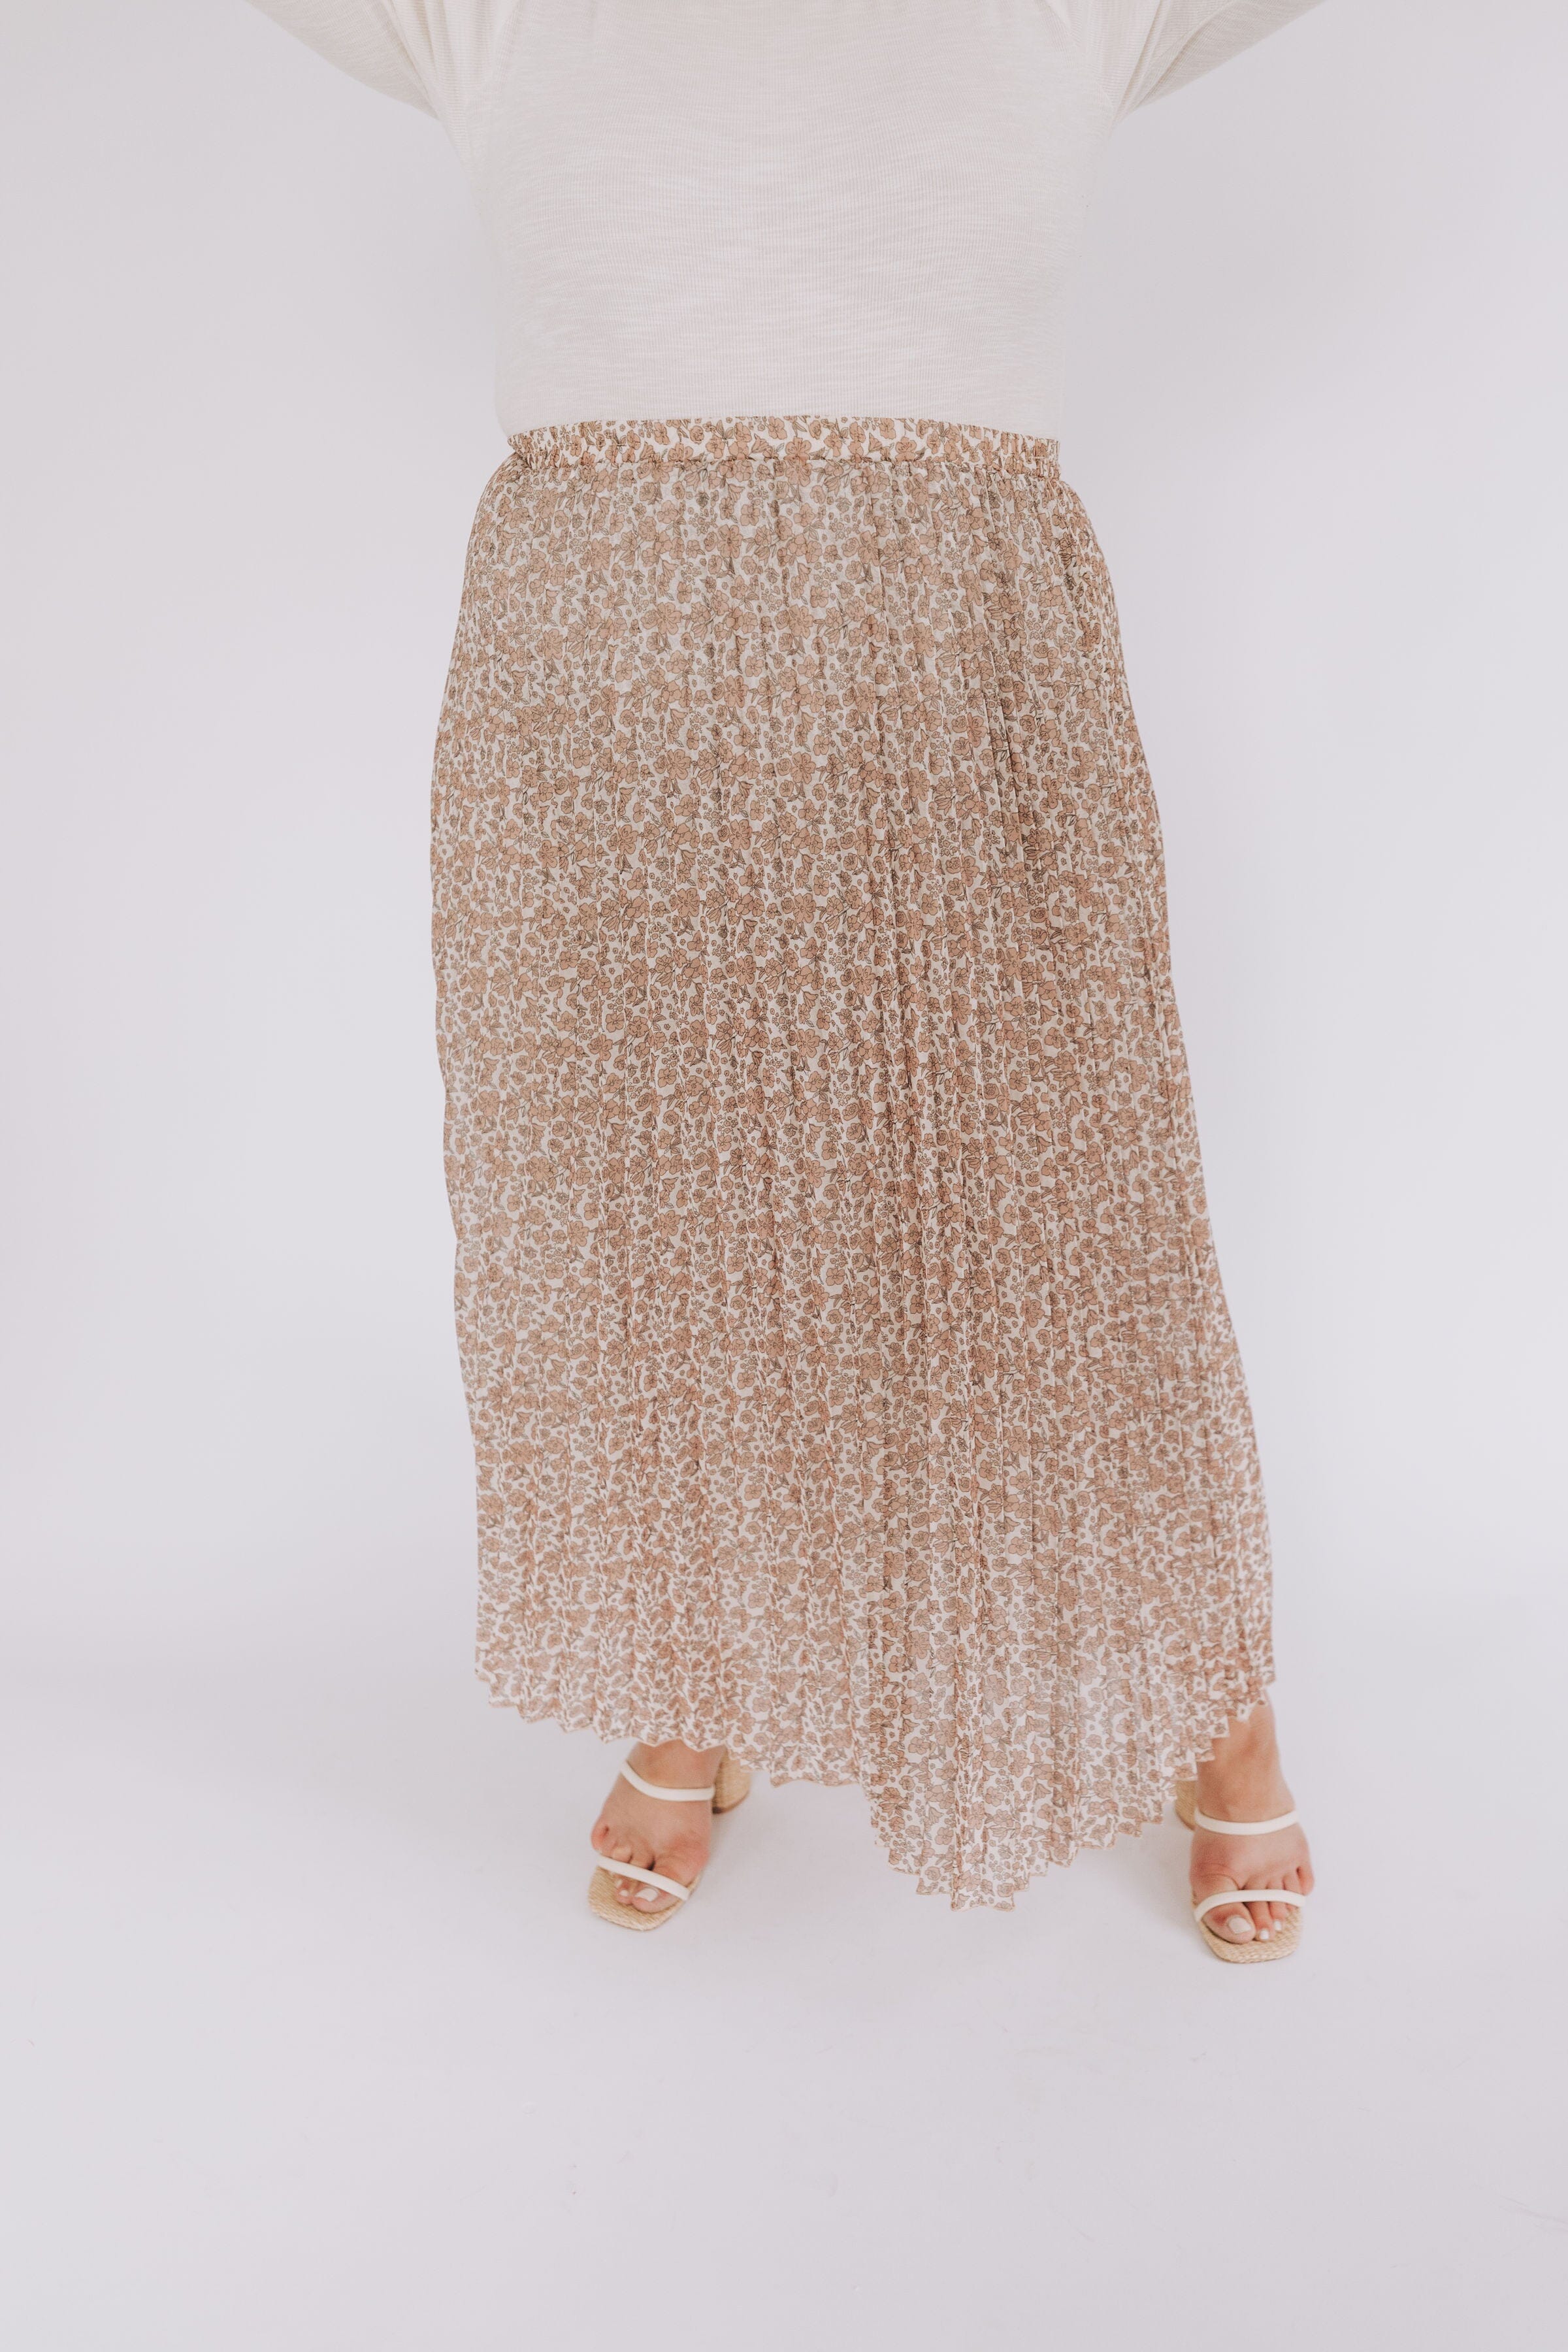 ONE LOVED BABE - Aria Skirt -2 Colors